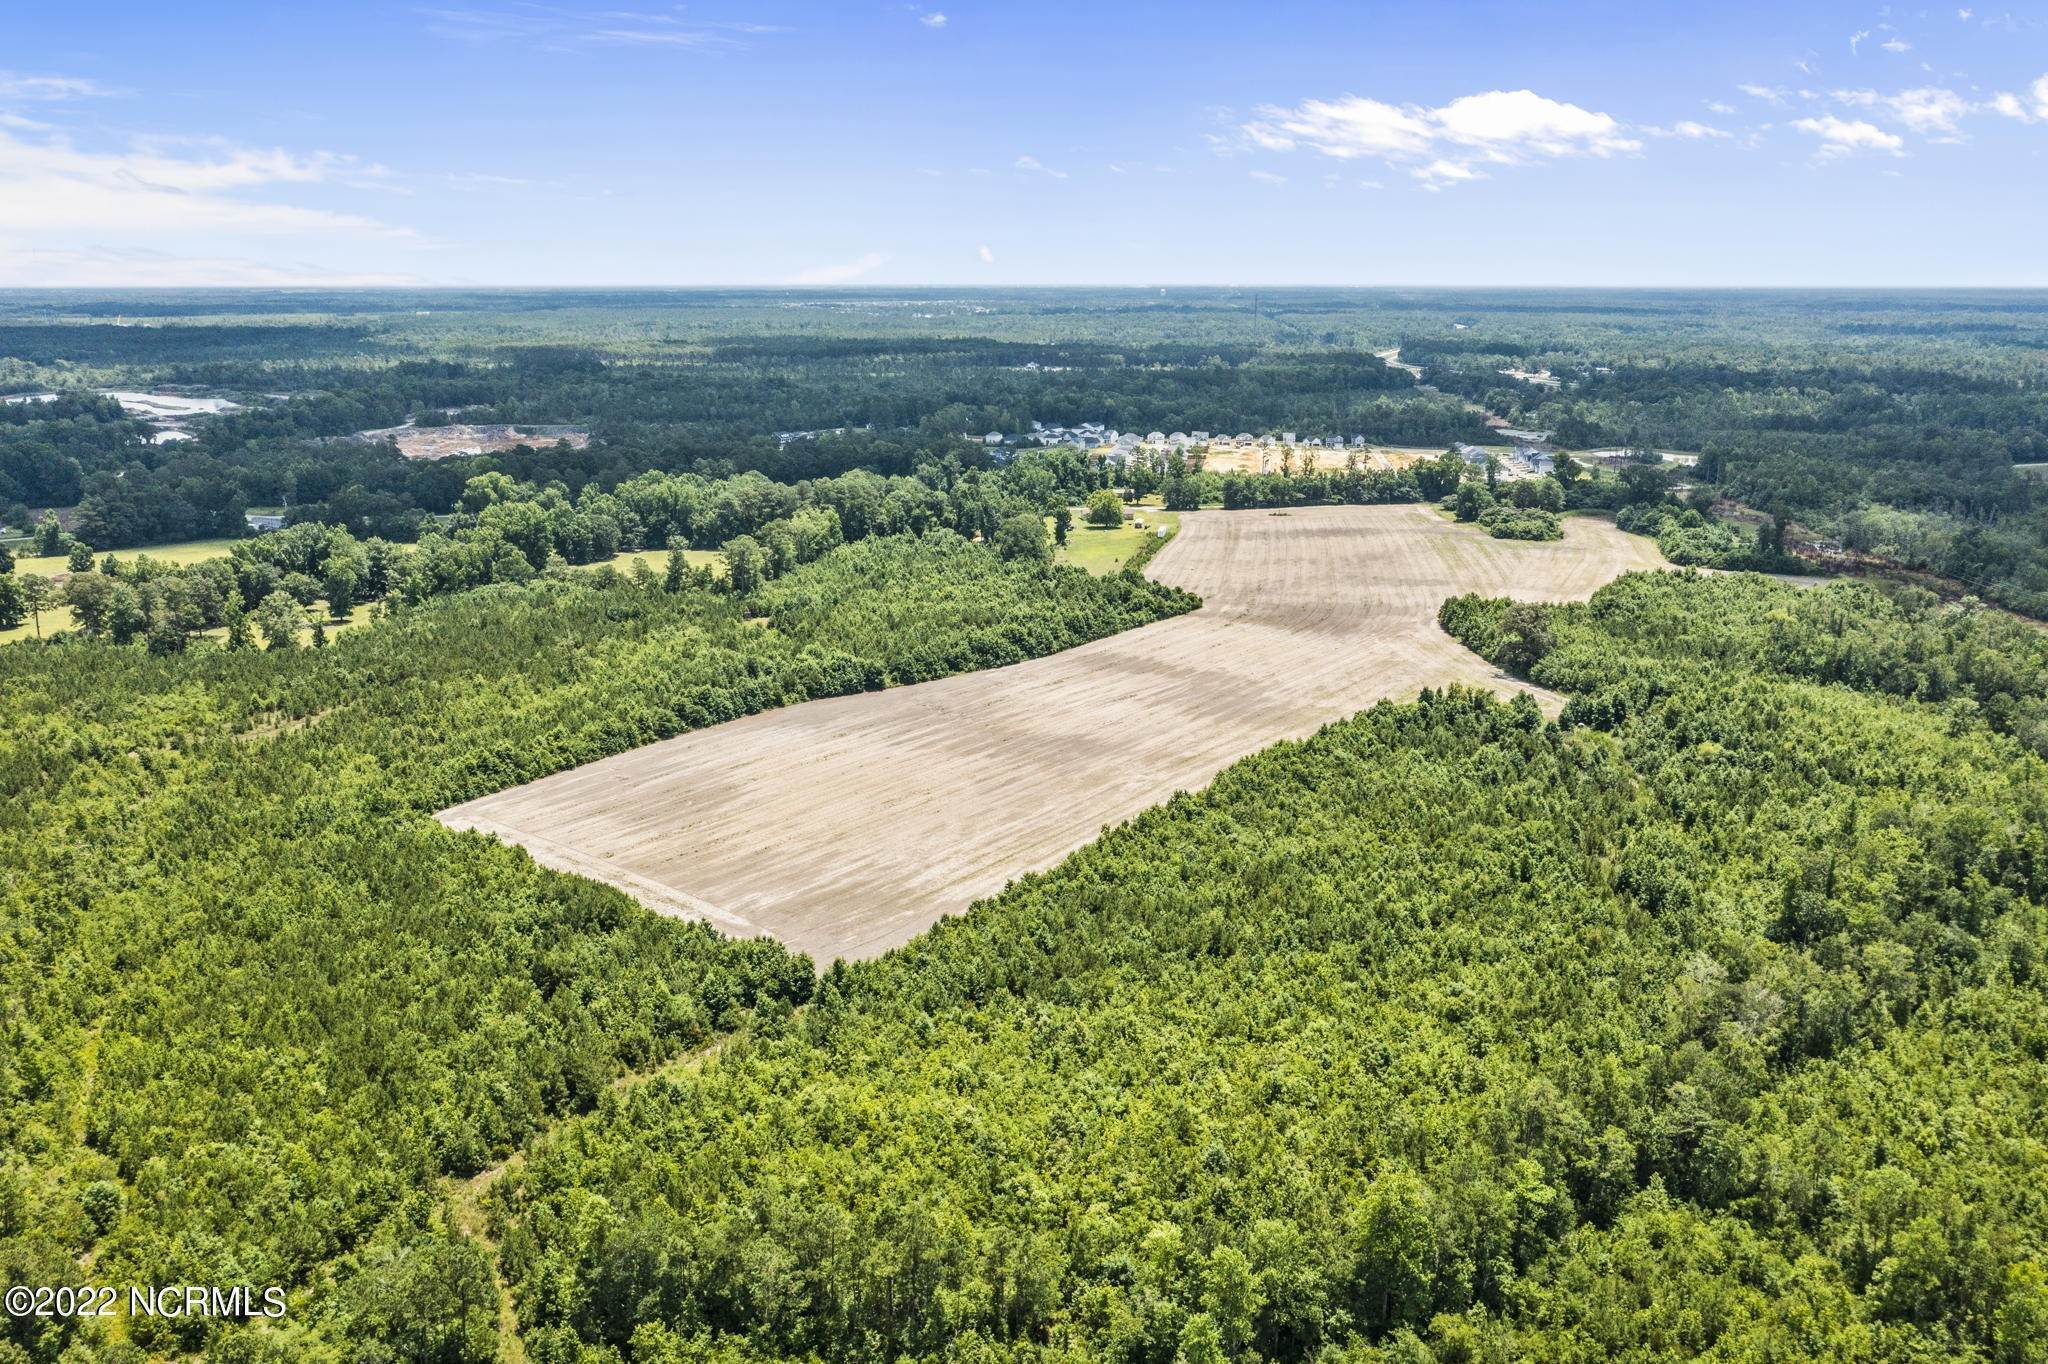 5. Land for Sale at Tr-1 Saw Mill Road Leland, North Carolina 28451 United States